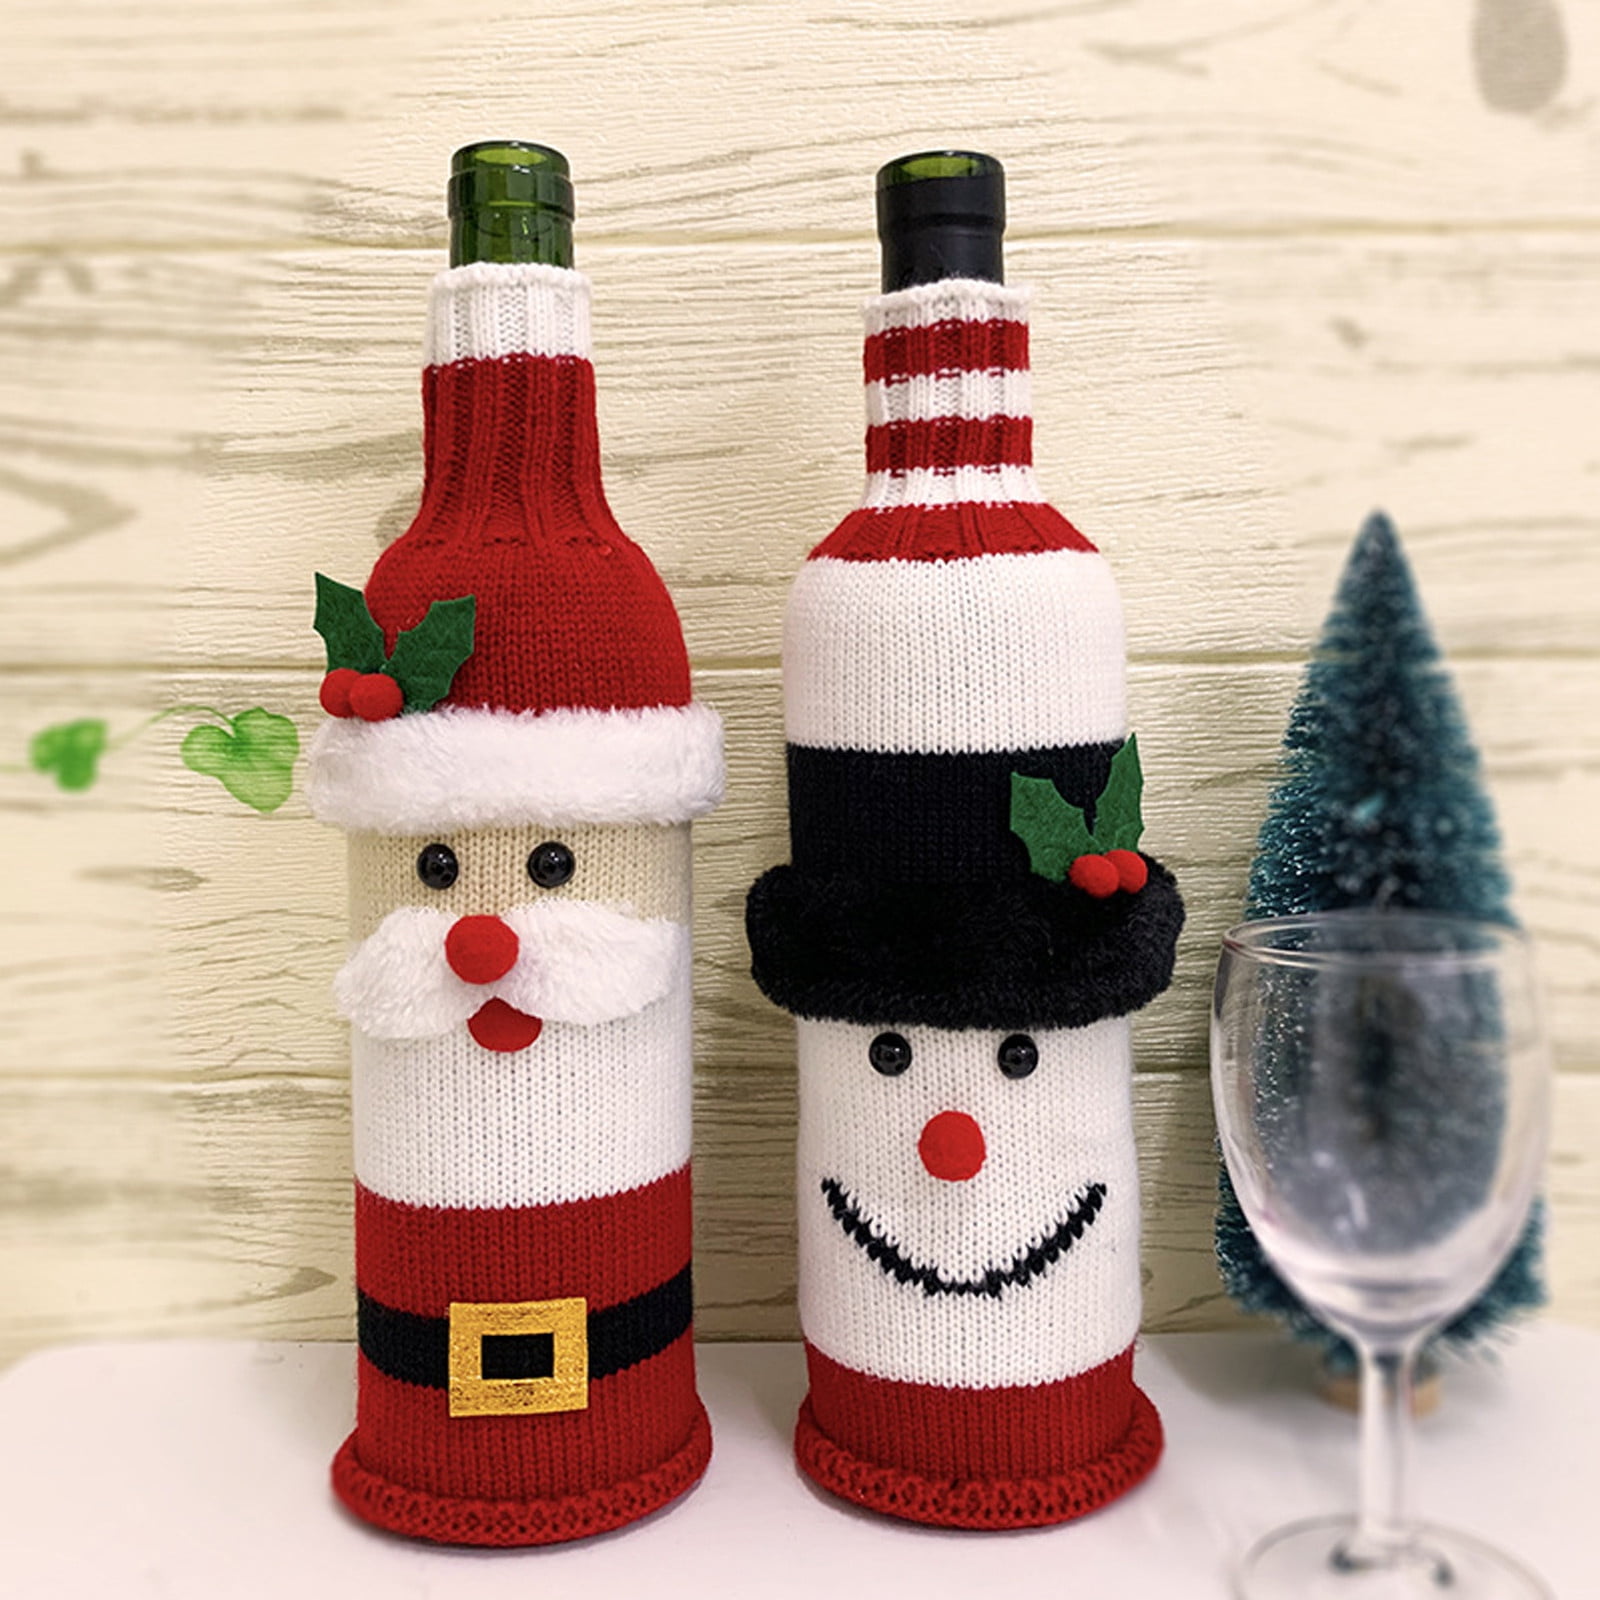 JERKKY Christmas Ornaments 7 Pieces Christmas Sweater Wine Bottle Cover Handmade Wine Bottle Sweater for Christmas Decorations Party Decorations 